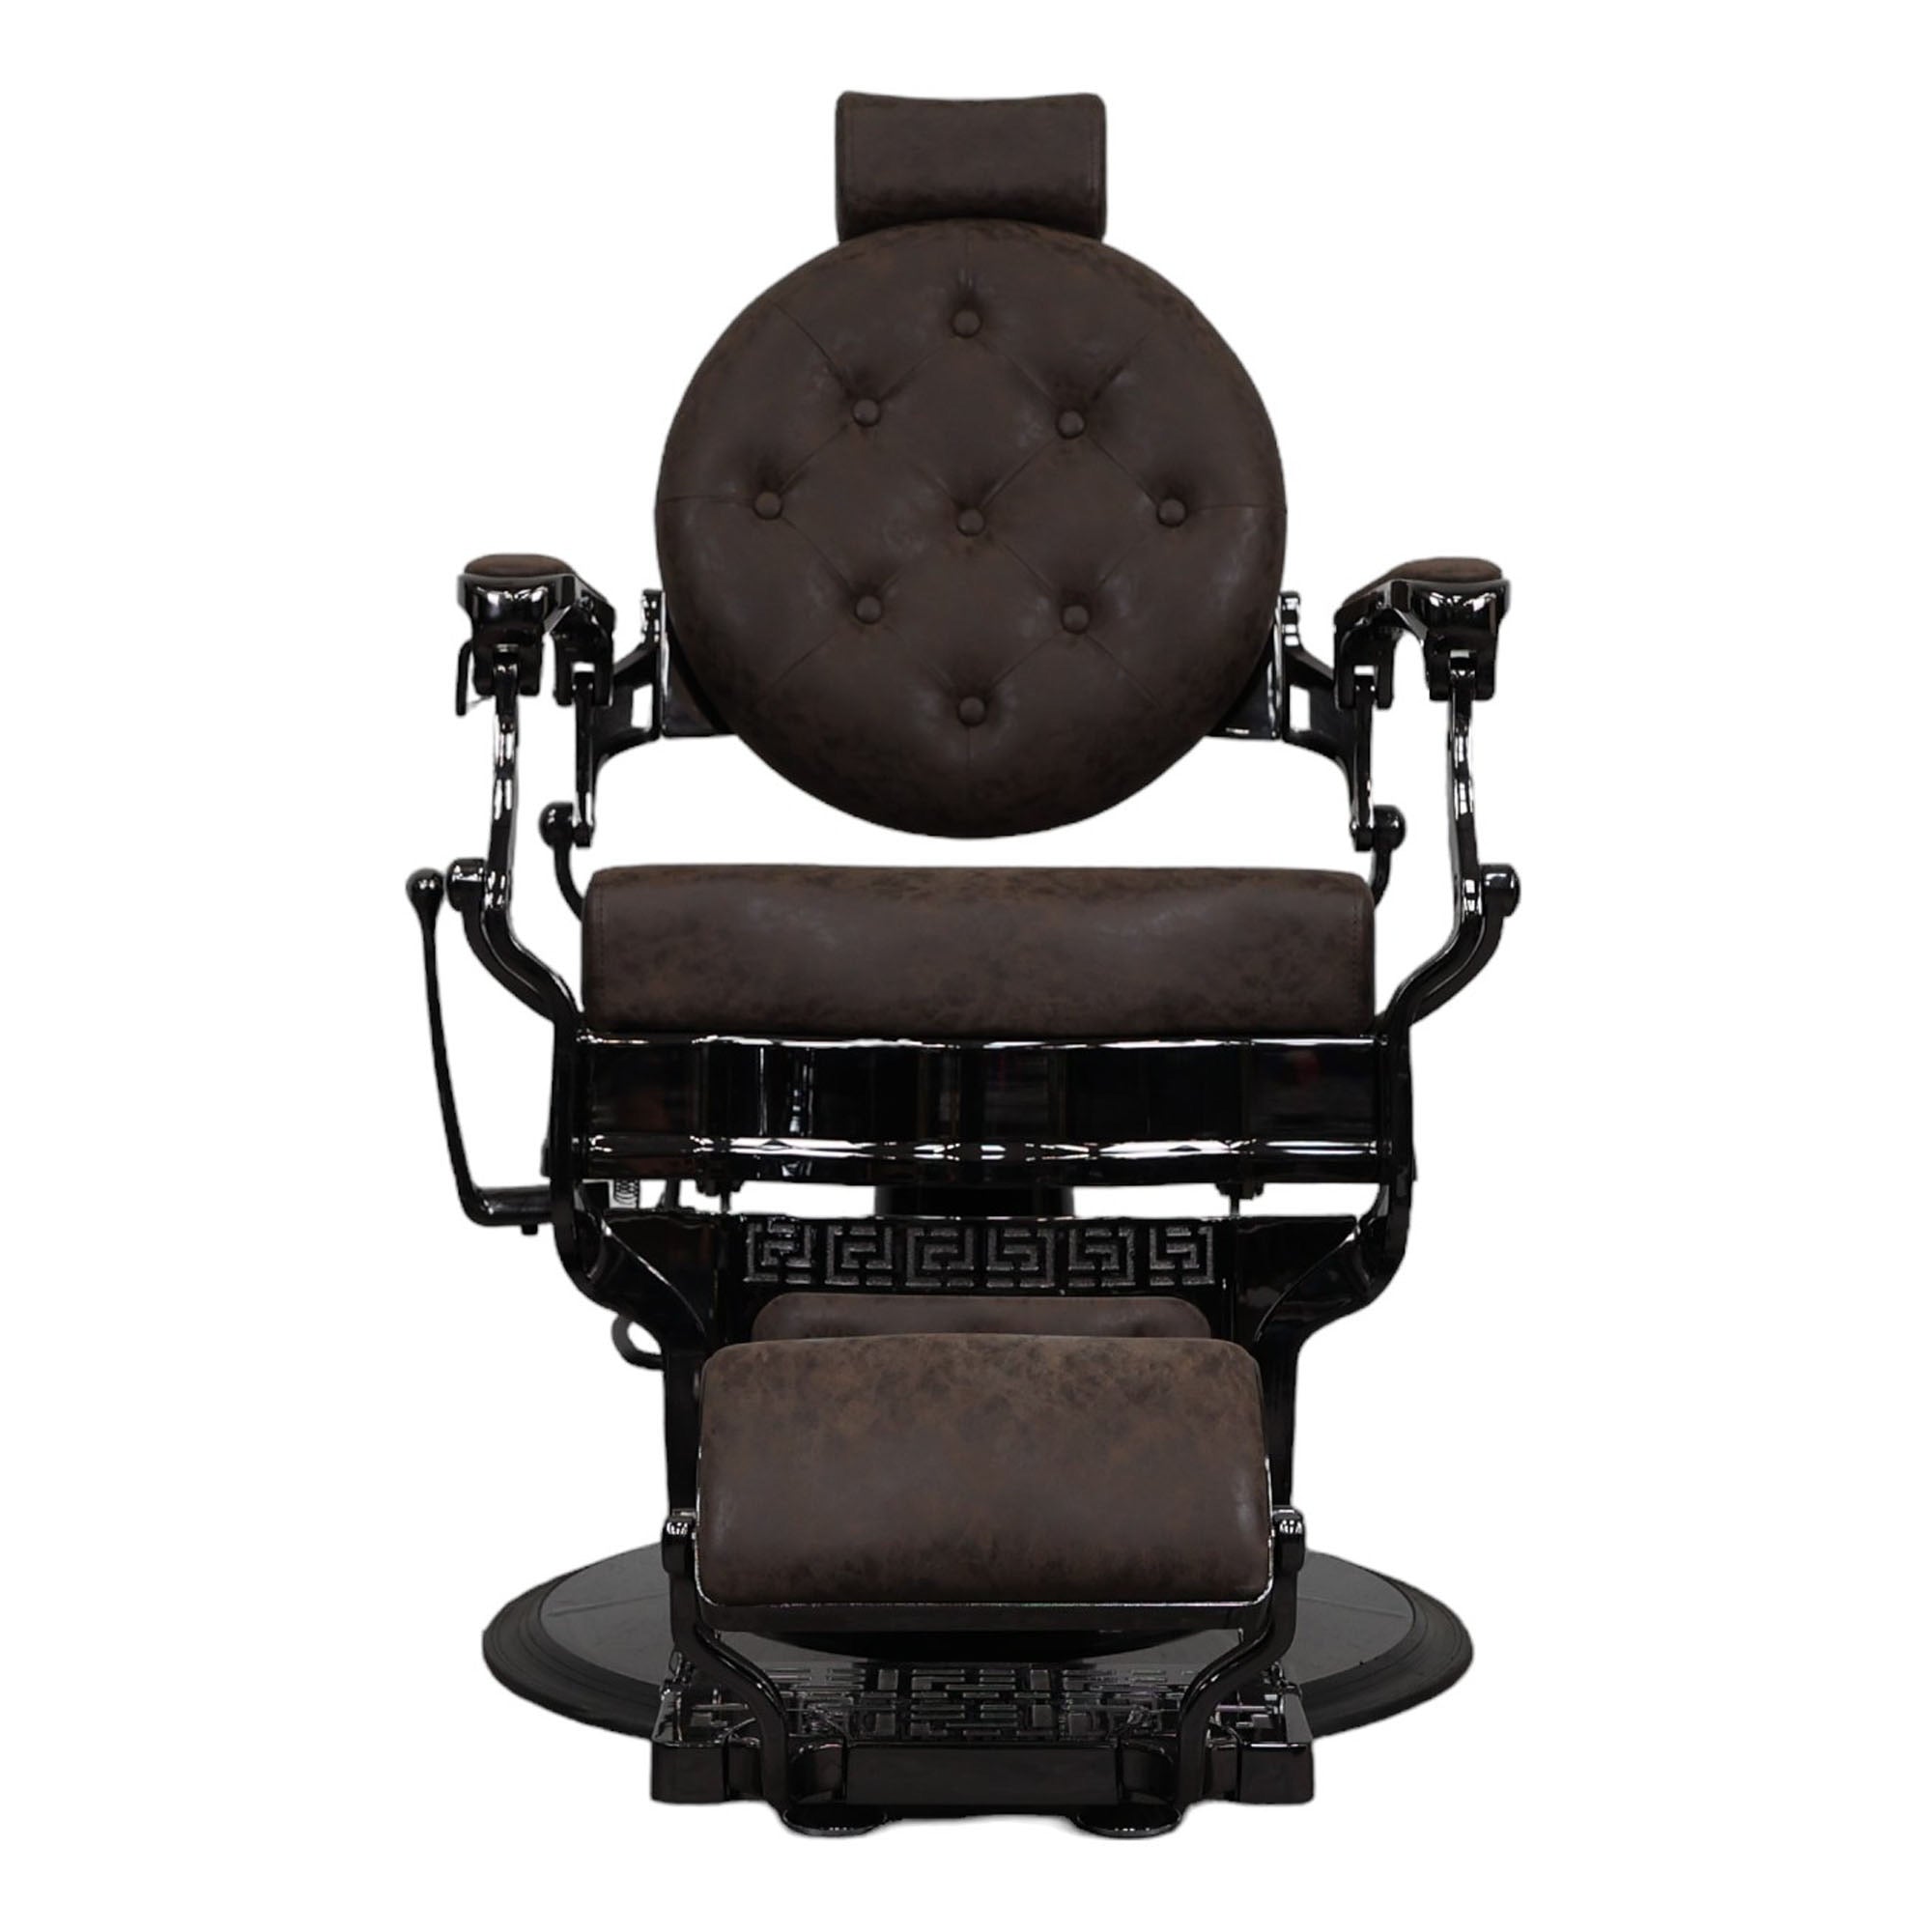 Barber Chair - Vintage Style Dark Brown Leather with Black Accents